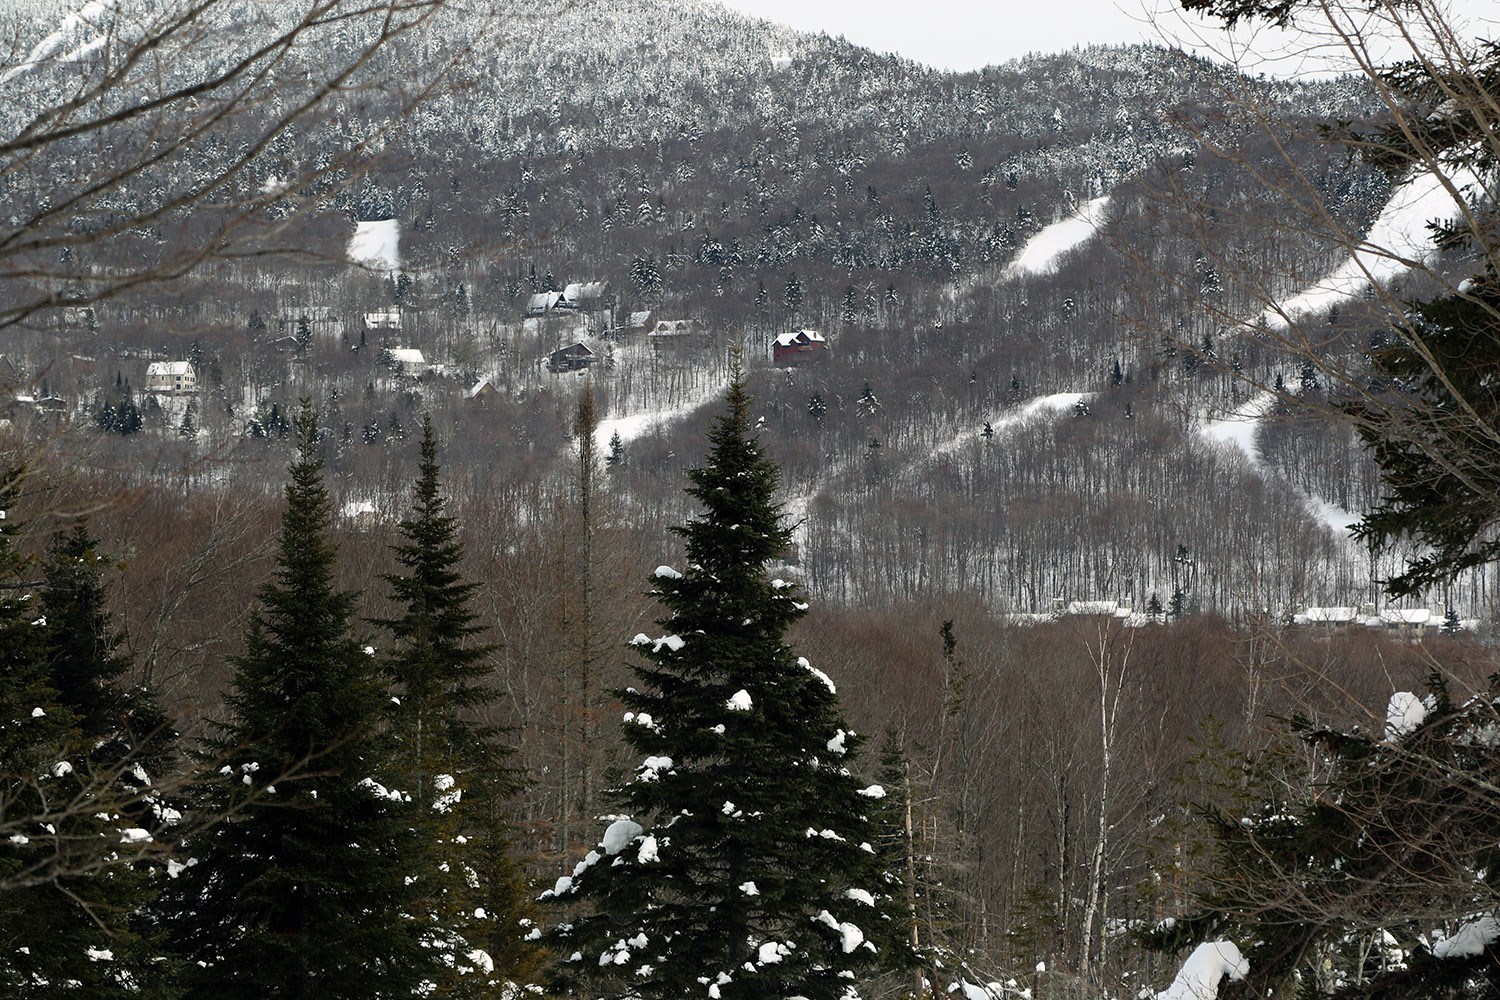 An image looking across from the Moose-Ski trail in the beaver ponds area of the Bolton Valley Nordic & Backcountry Network toward the Bolton Valley Village at Bolton Valley Ski Resort in Vermont